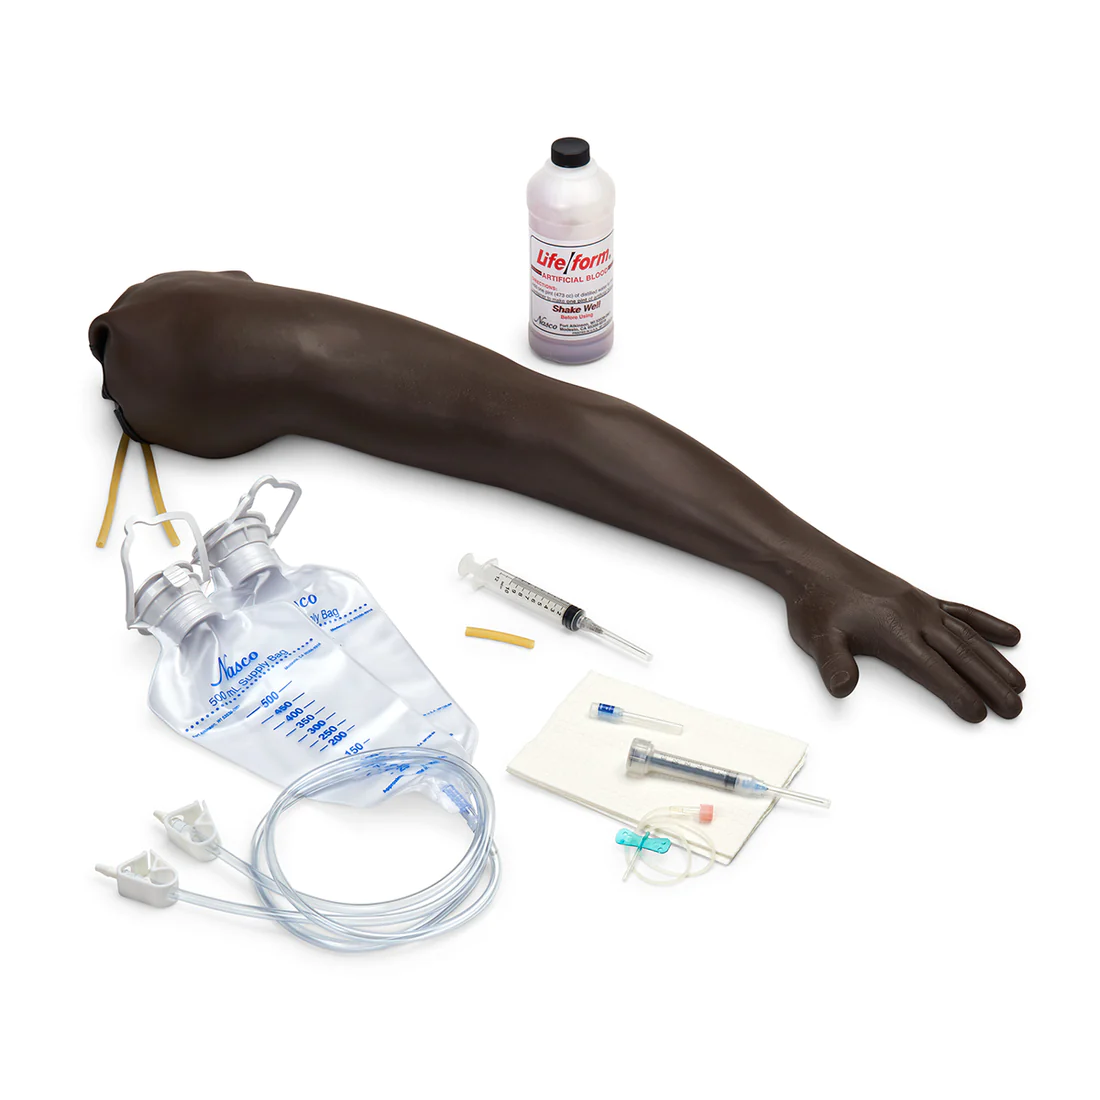 Life/form Adult Venipuncture & Injection Training Arm | Dark